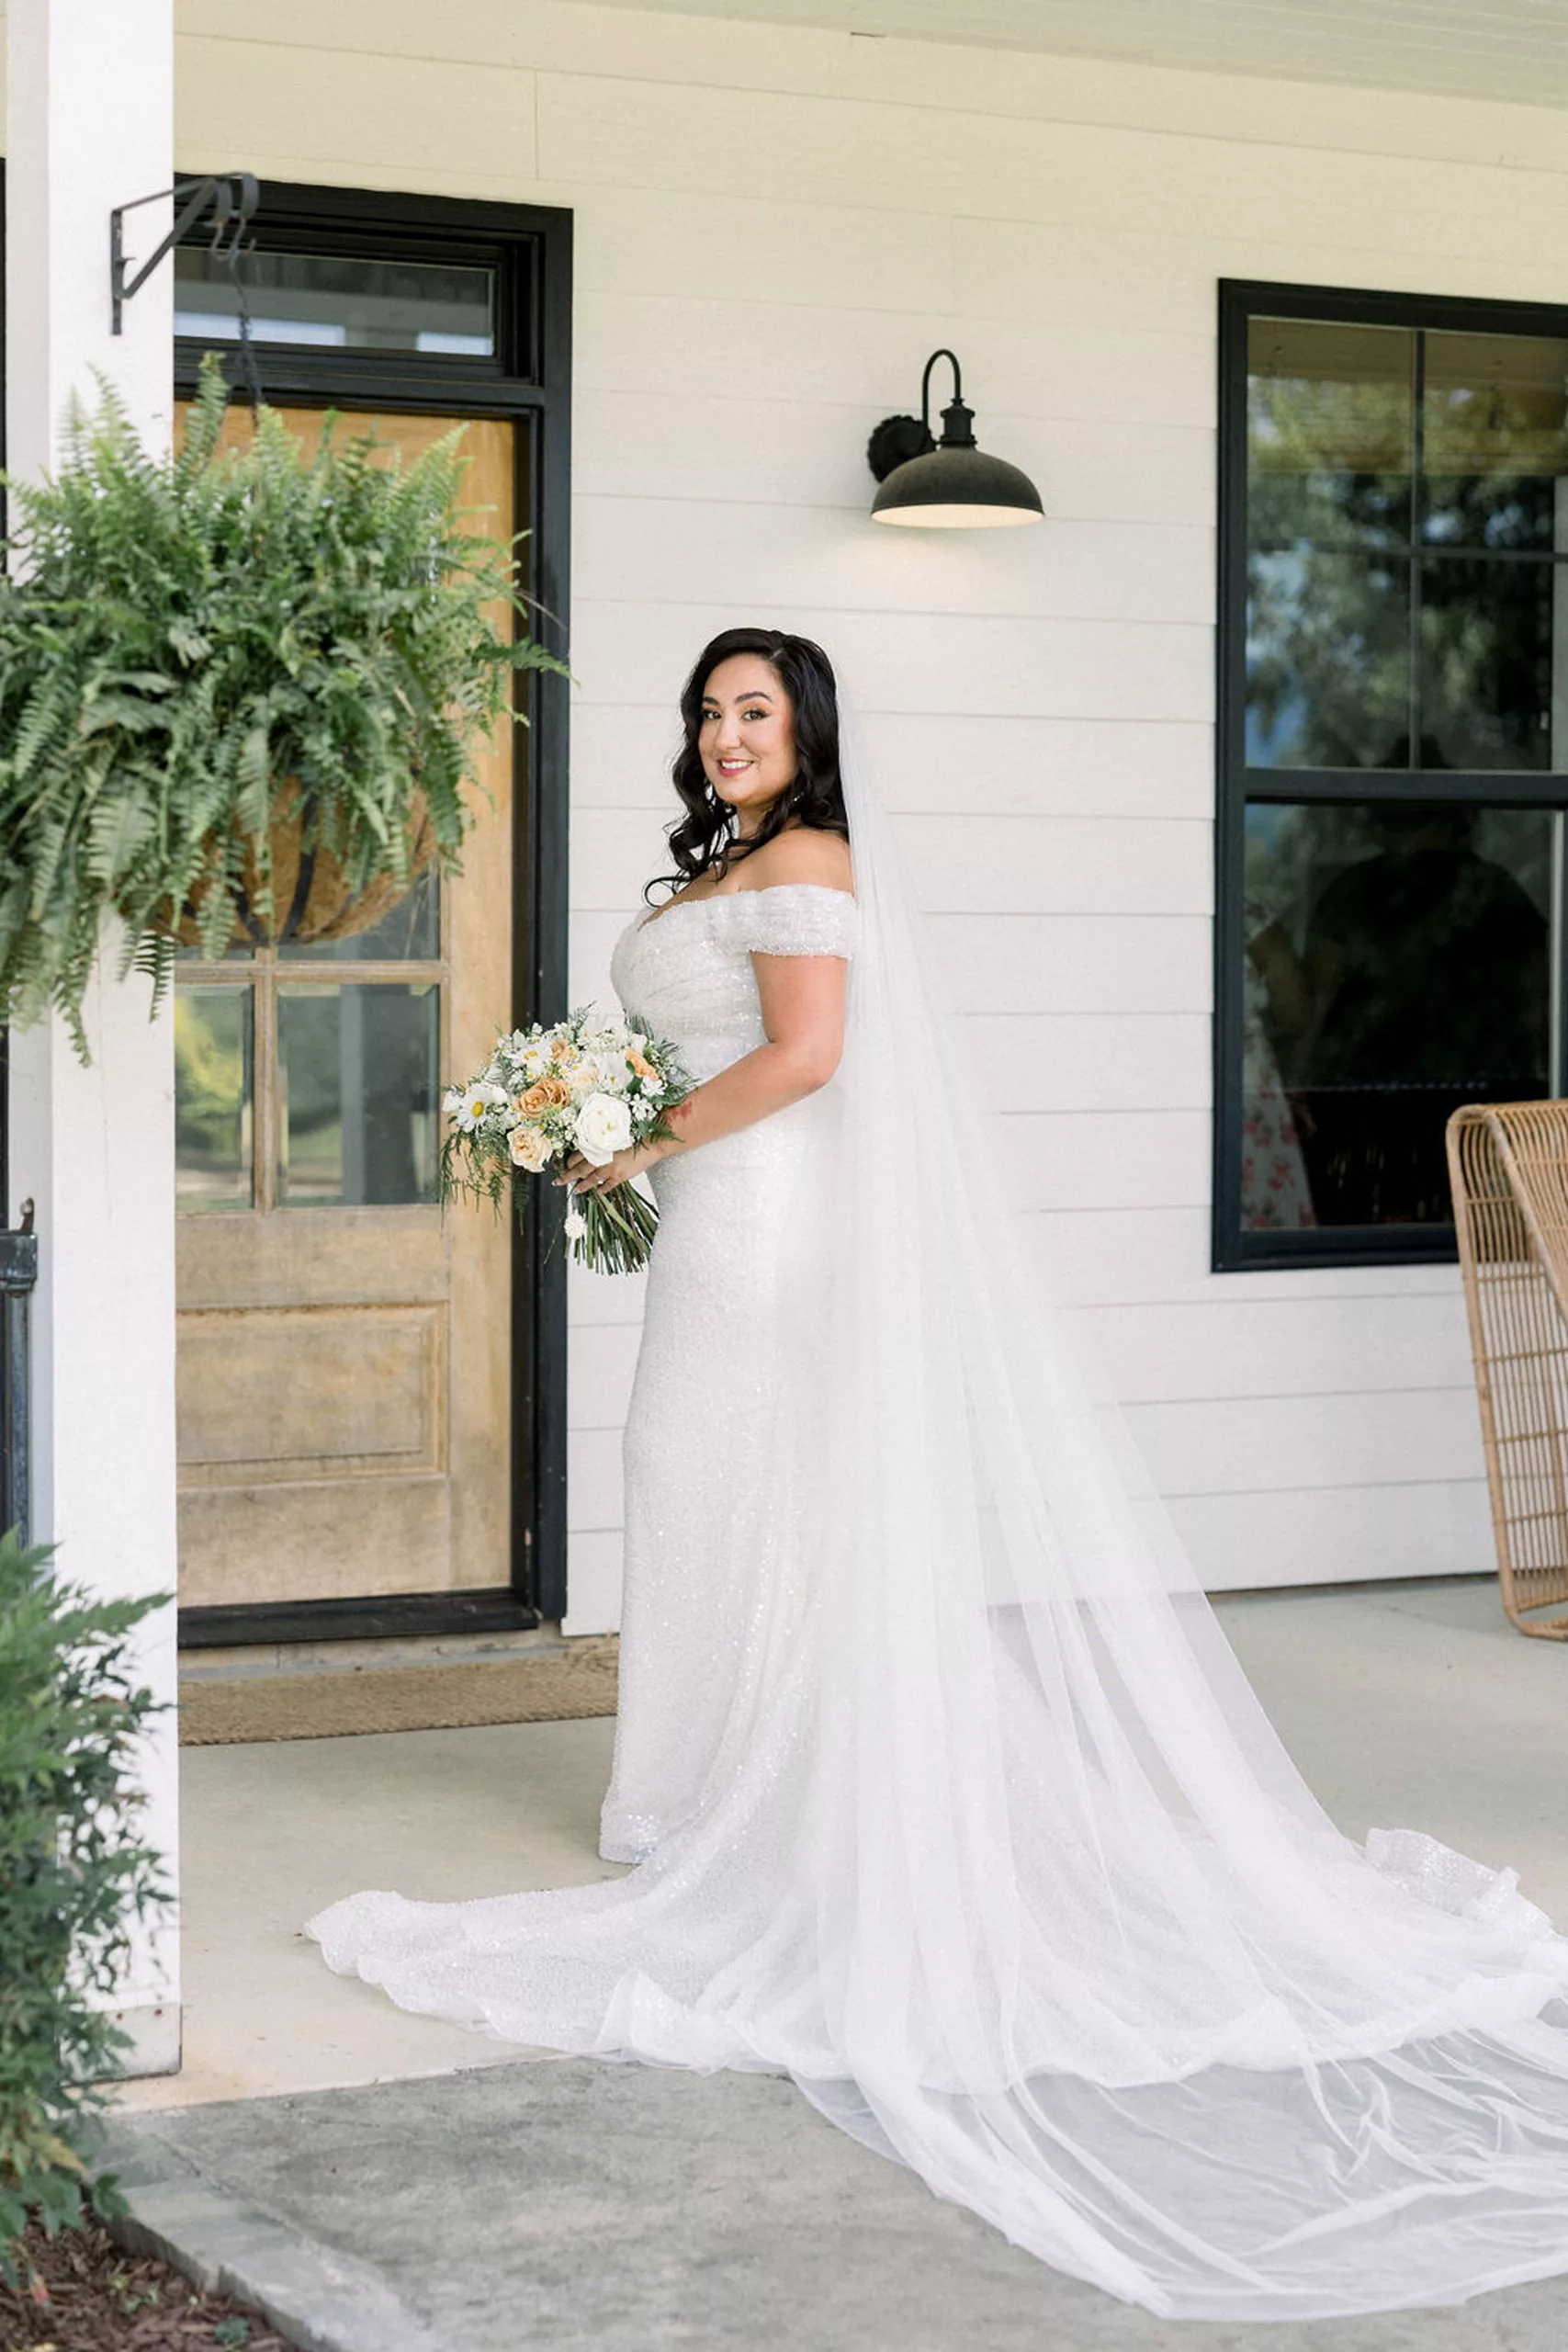 A bride stands on a porch with her train spread holding her white bouquet